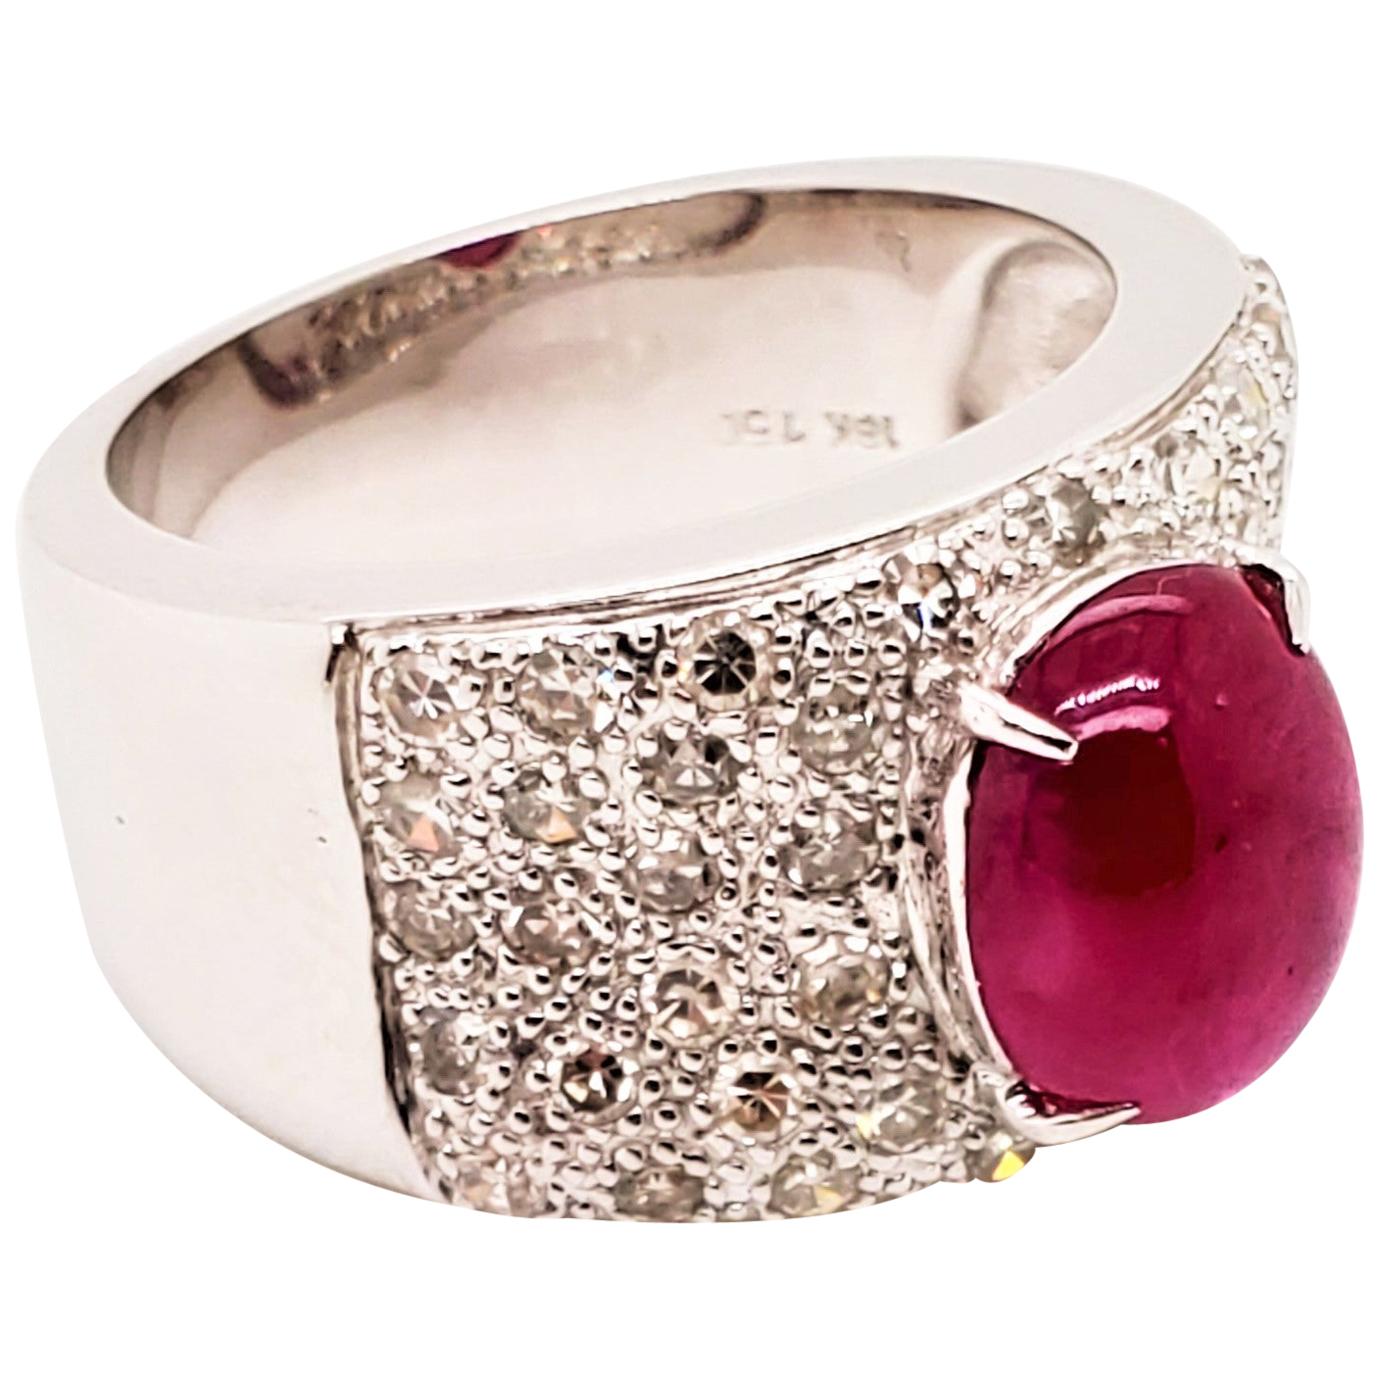 2.53 Carat Ruby Cabochon And Diamond White Gold Engagement Ring:

A beautiful ring comprised of a 2.53 carat vivid red ruby cabochon and surrounded by numerous white diamonds weighing 0.8 carat! The ruby is of vivid red colour, with good lustre and